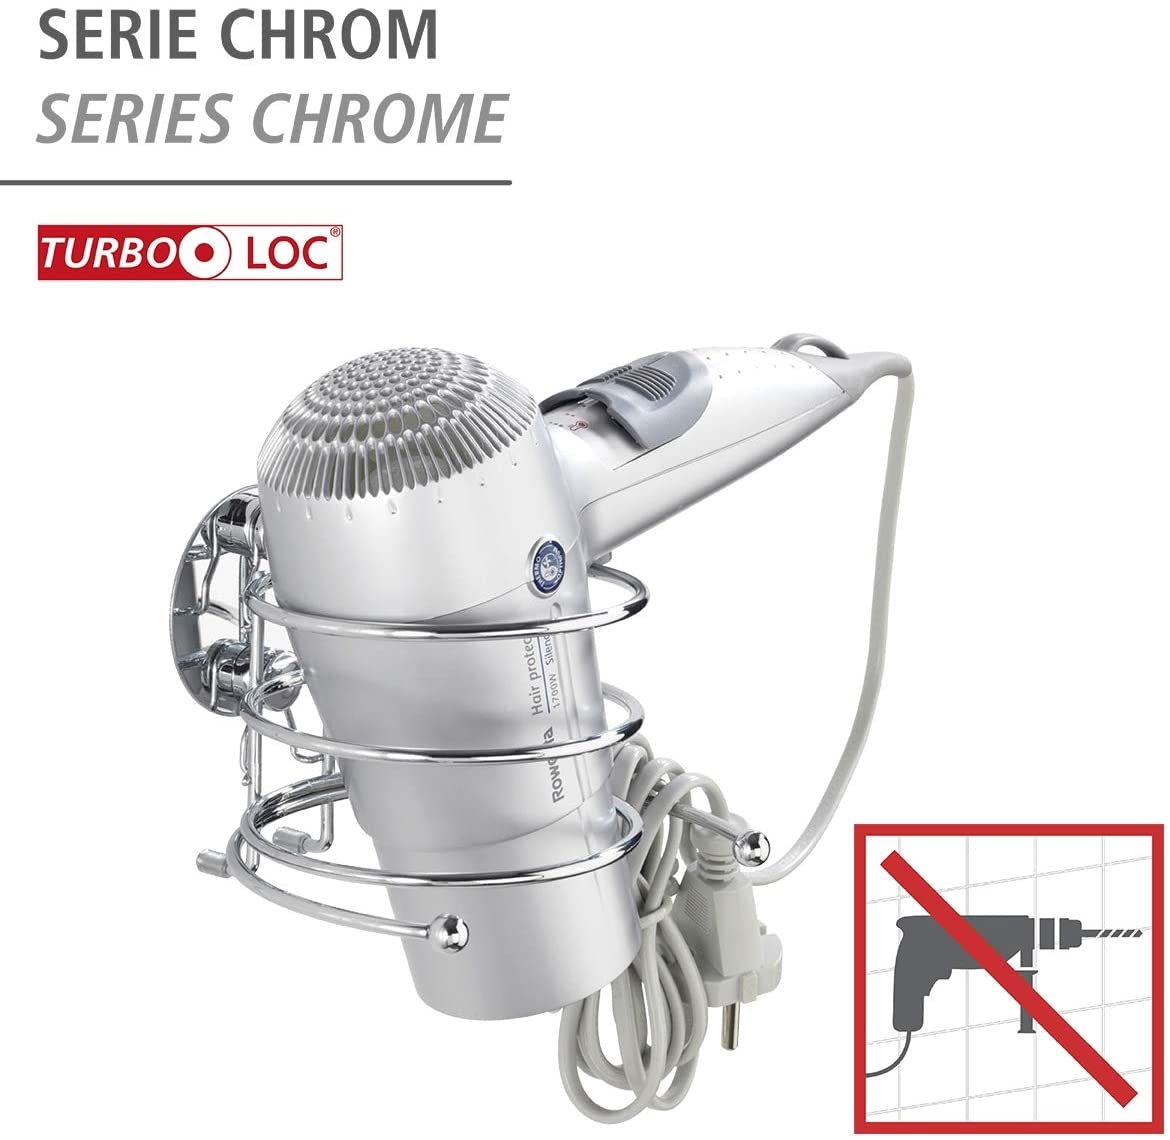 WENKO Turbo-Loc hair dryer holder - attach without drilling, cable holder, steel, 14 x 7.5 x 11.5 cm, chrome